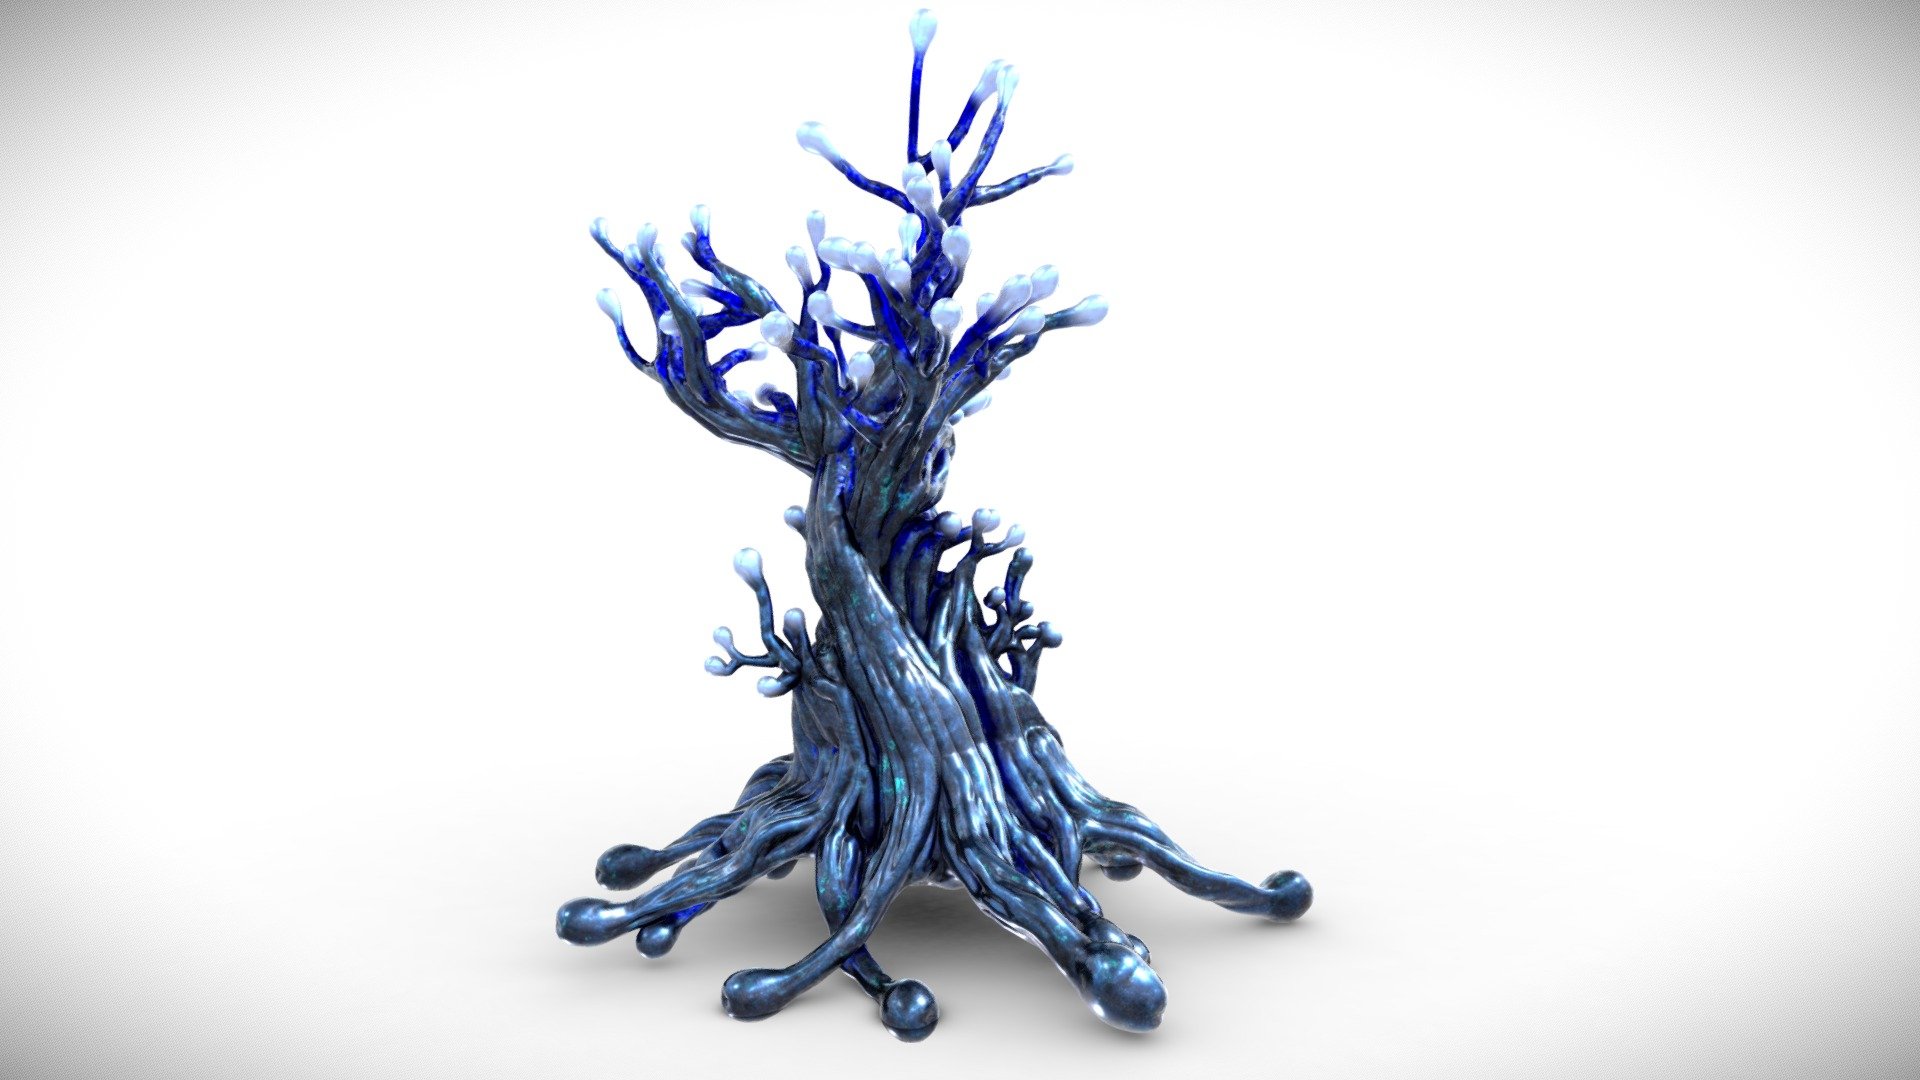 This Alien Plant contains multiple 4096x4096 textures.
Textures contained are:
- Diffuse
- Normal
- Roughness - Alien Fantasy Plant - Tentacle Oak - Buy Royalty Free 3D model by Davis3D 3d model